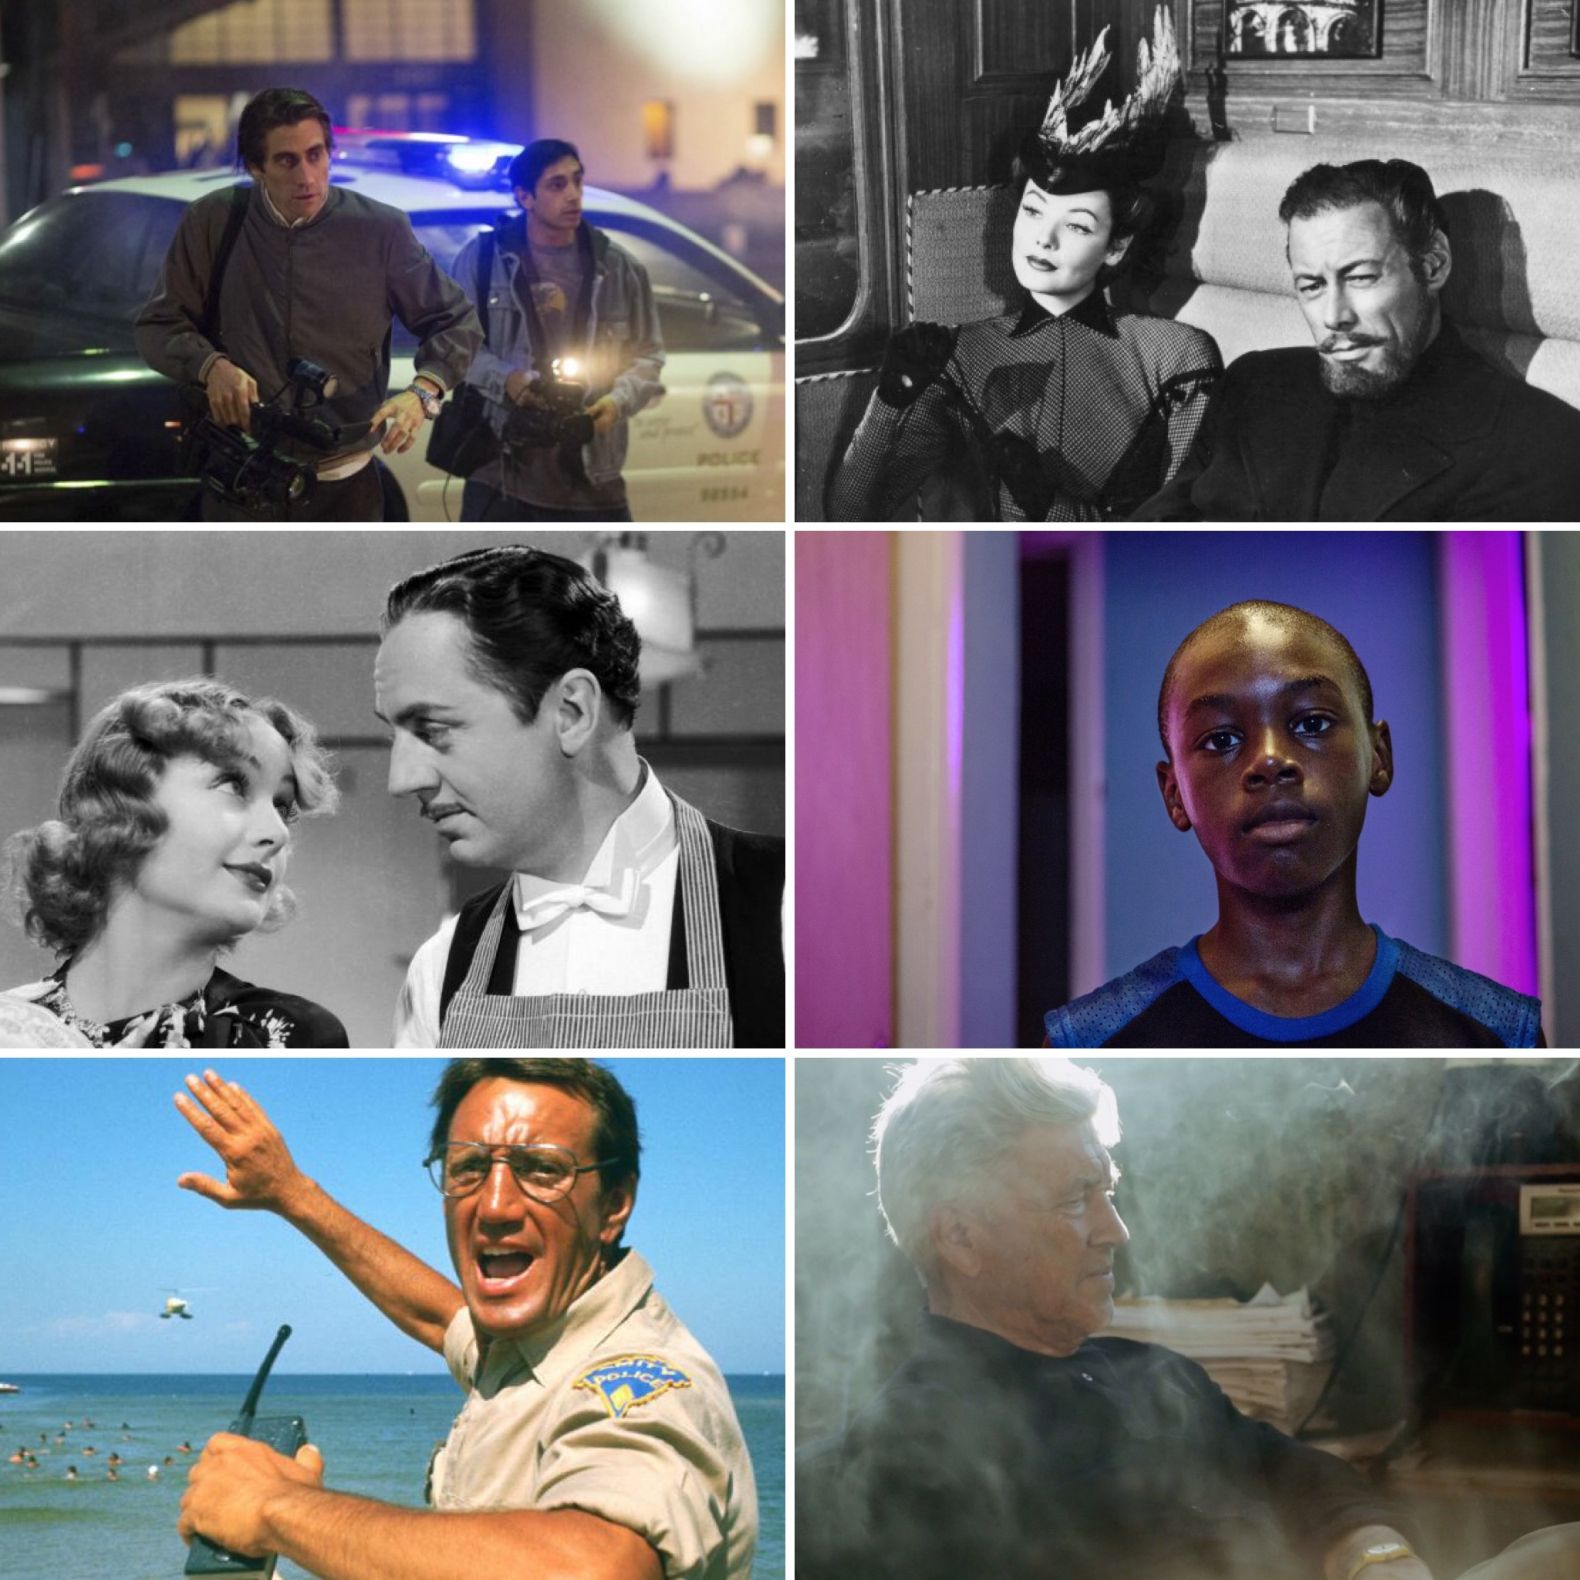 Duke Box #46: Our Guide to the Best Films on TV